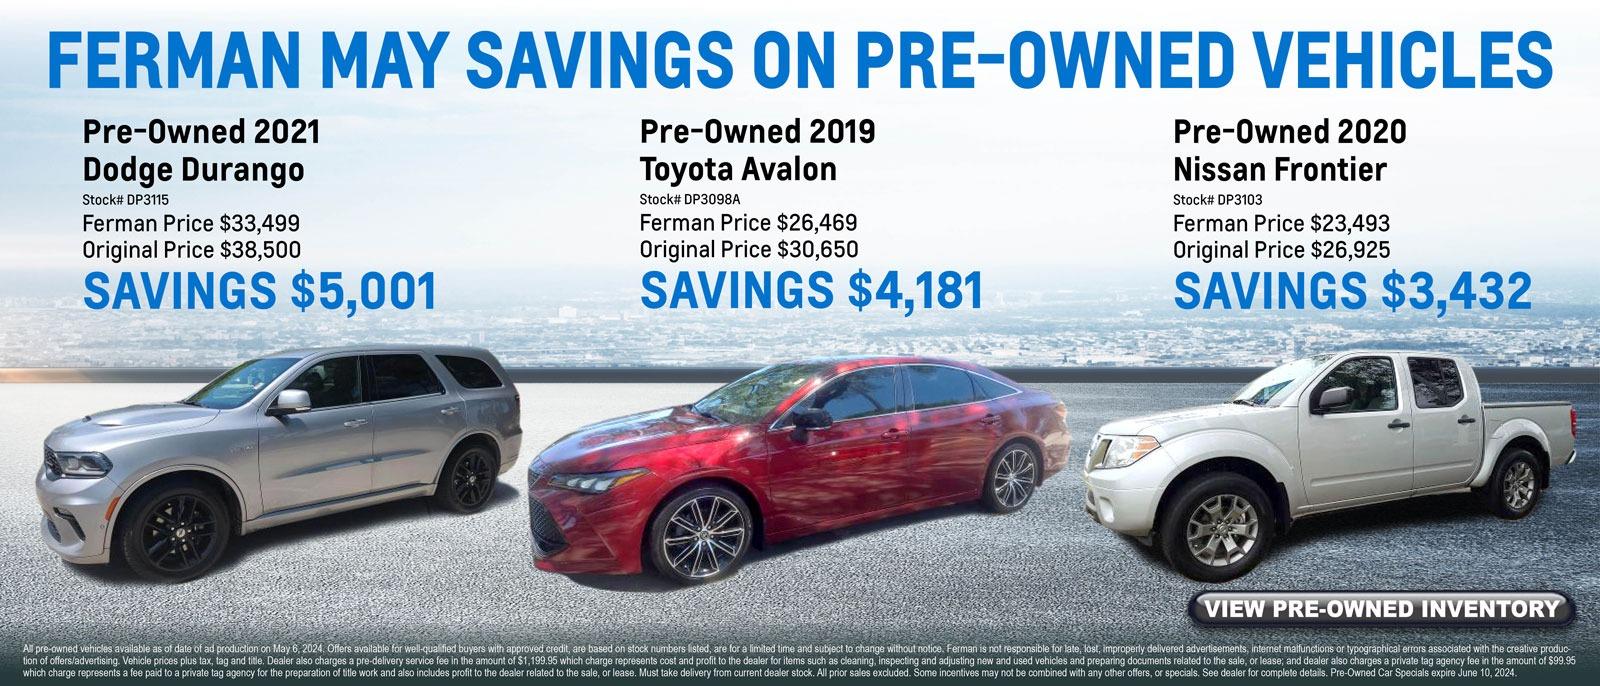 May Savings on Pre-Owned 2021 Dodge Durango, 2019 Toyota Avalon and 2020 Nissan Frontier